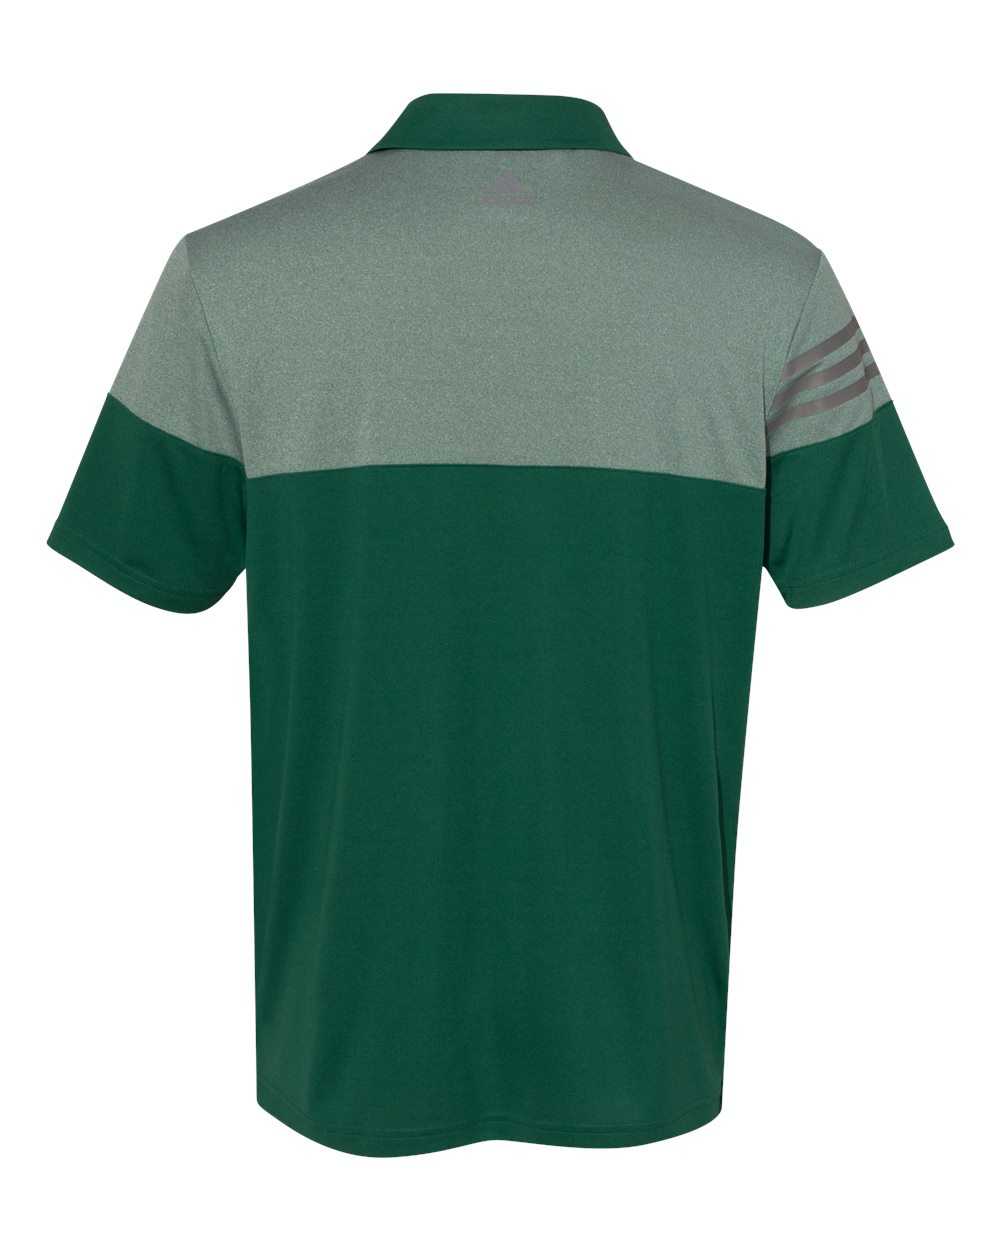 Adidas A213 Heathered 3-Stripes Block Sport Shirt - Collegiate Green - HIT a Double